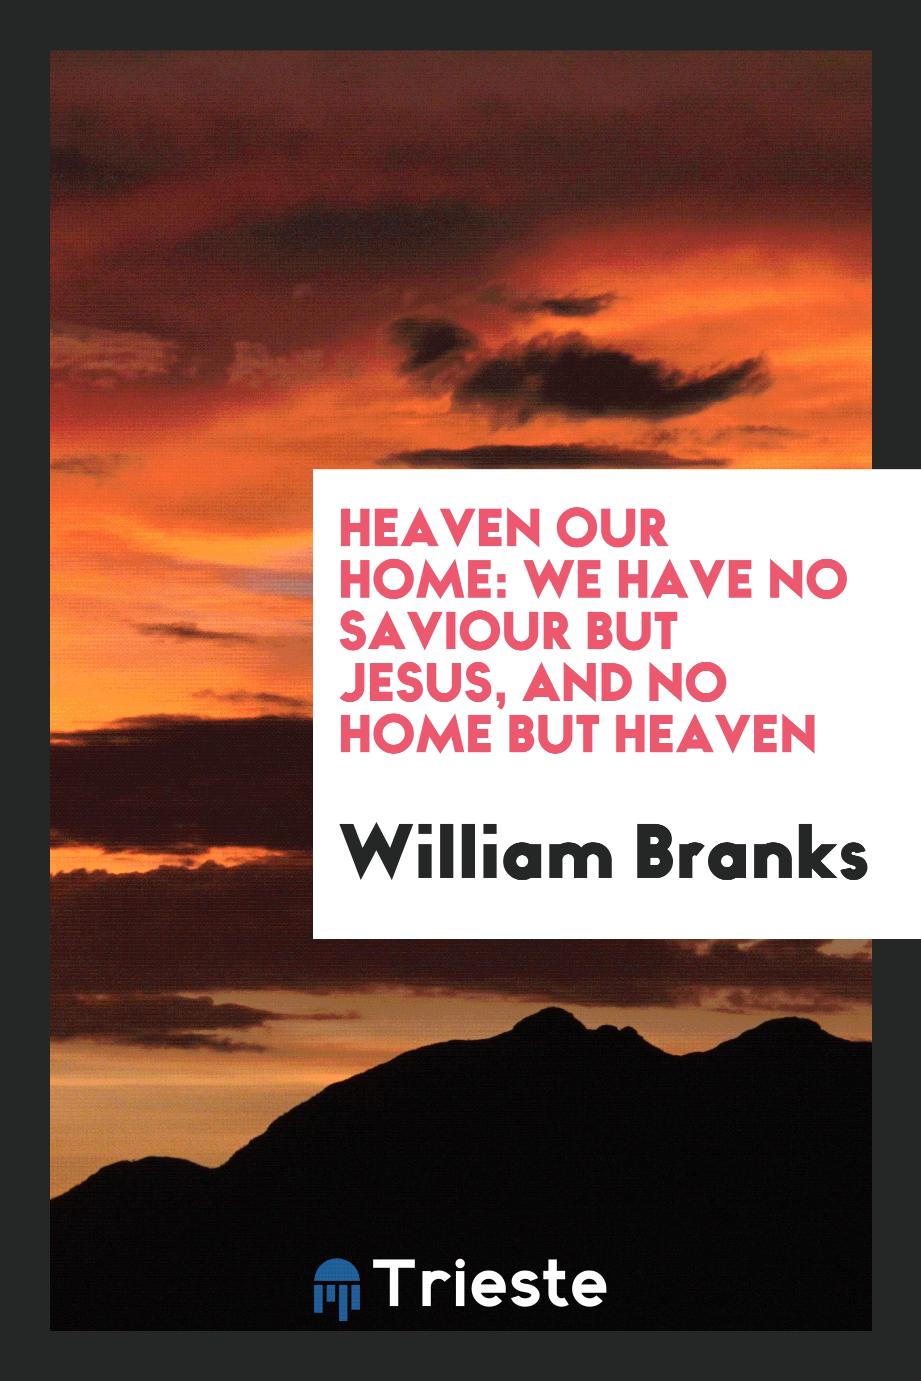 Heaven Our Home: We Have No Saviour but Jesus, and No Home but Heaven